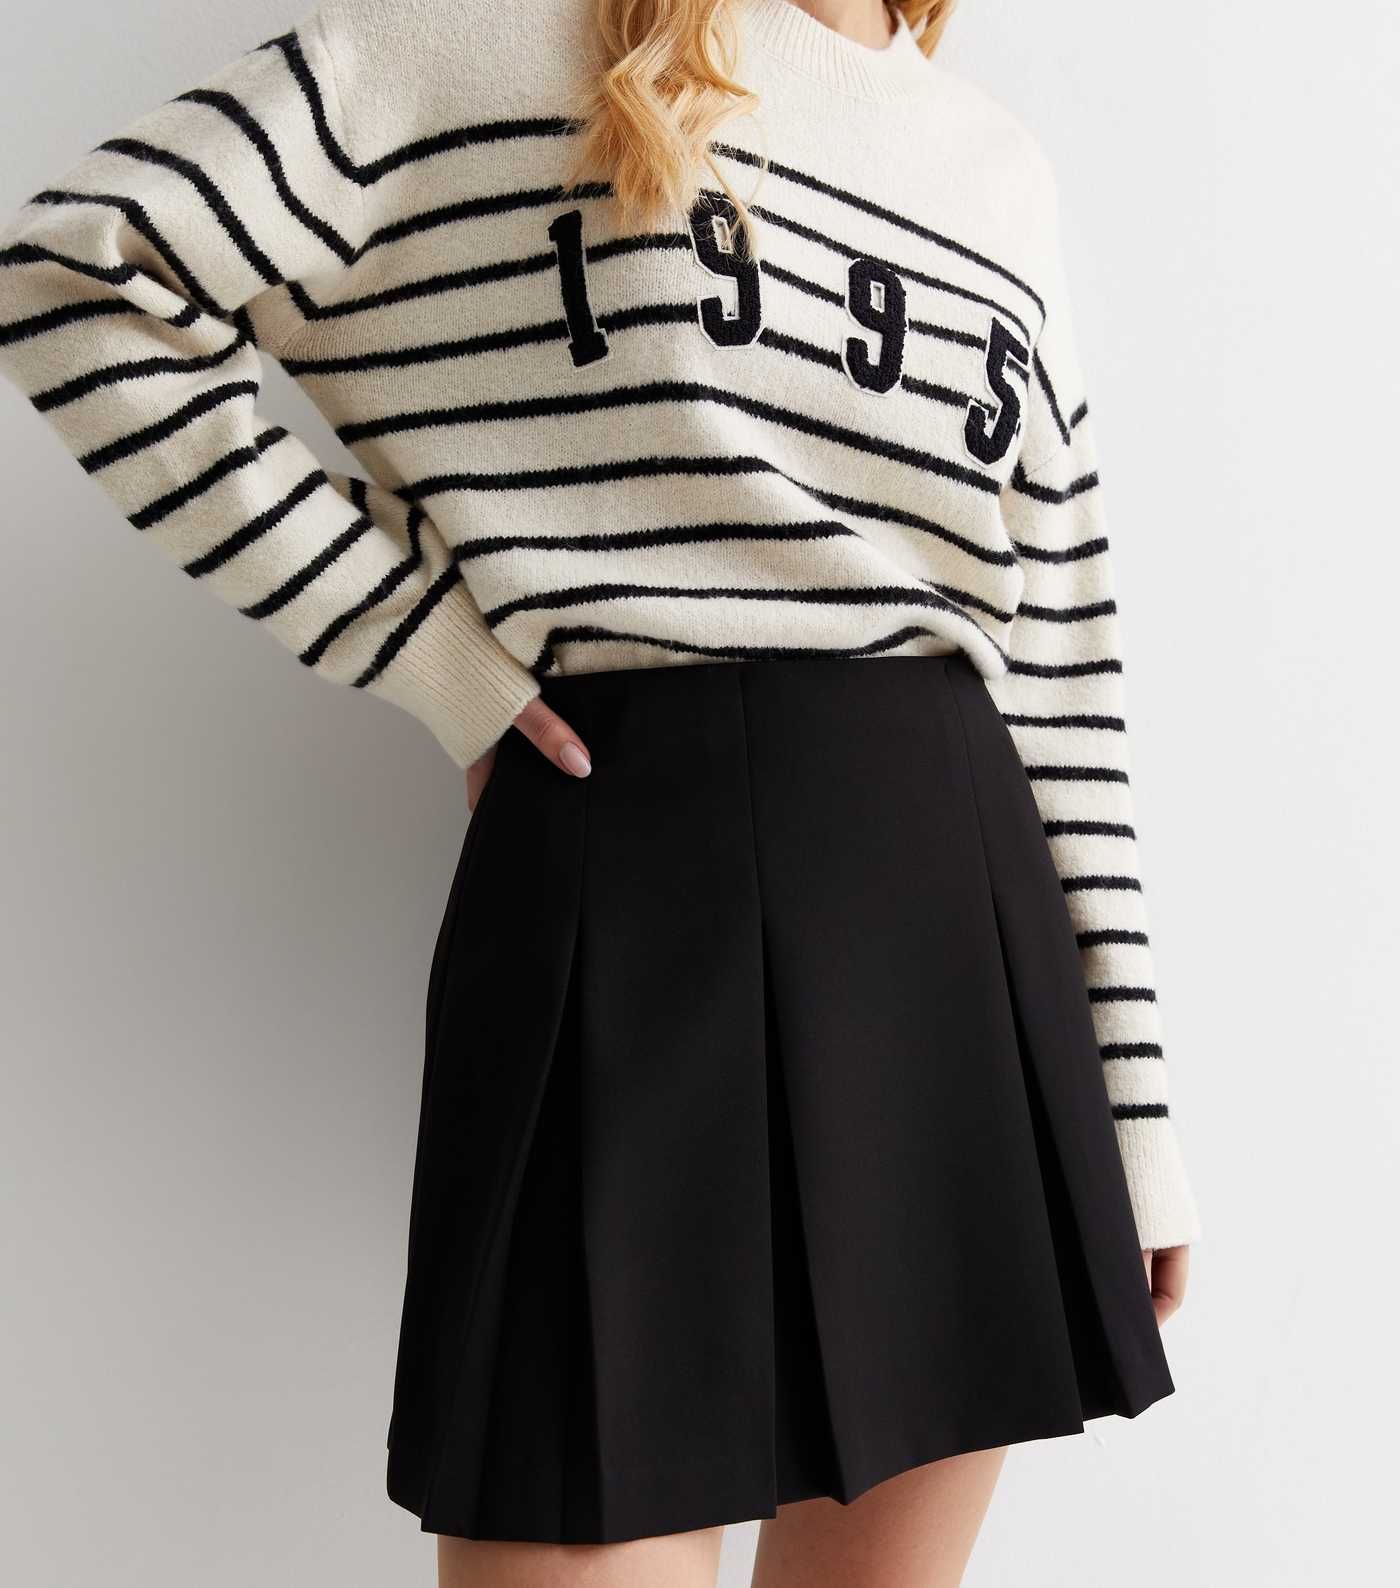 Black Pleated Mini Skirt
						
						Add to Saved Items
						Remove from Saved Items | New Look (UK)